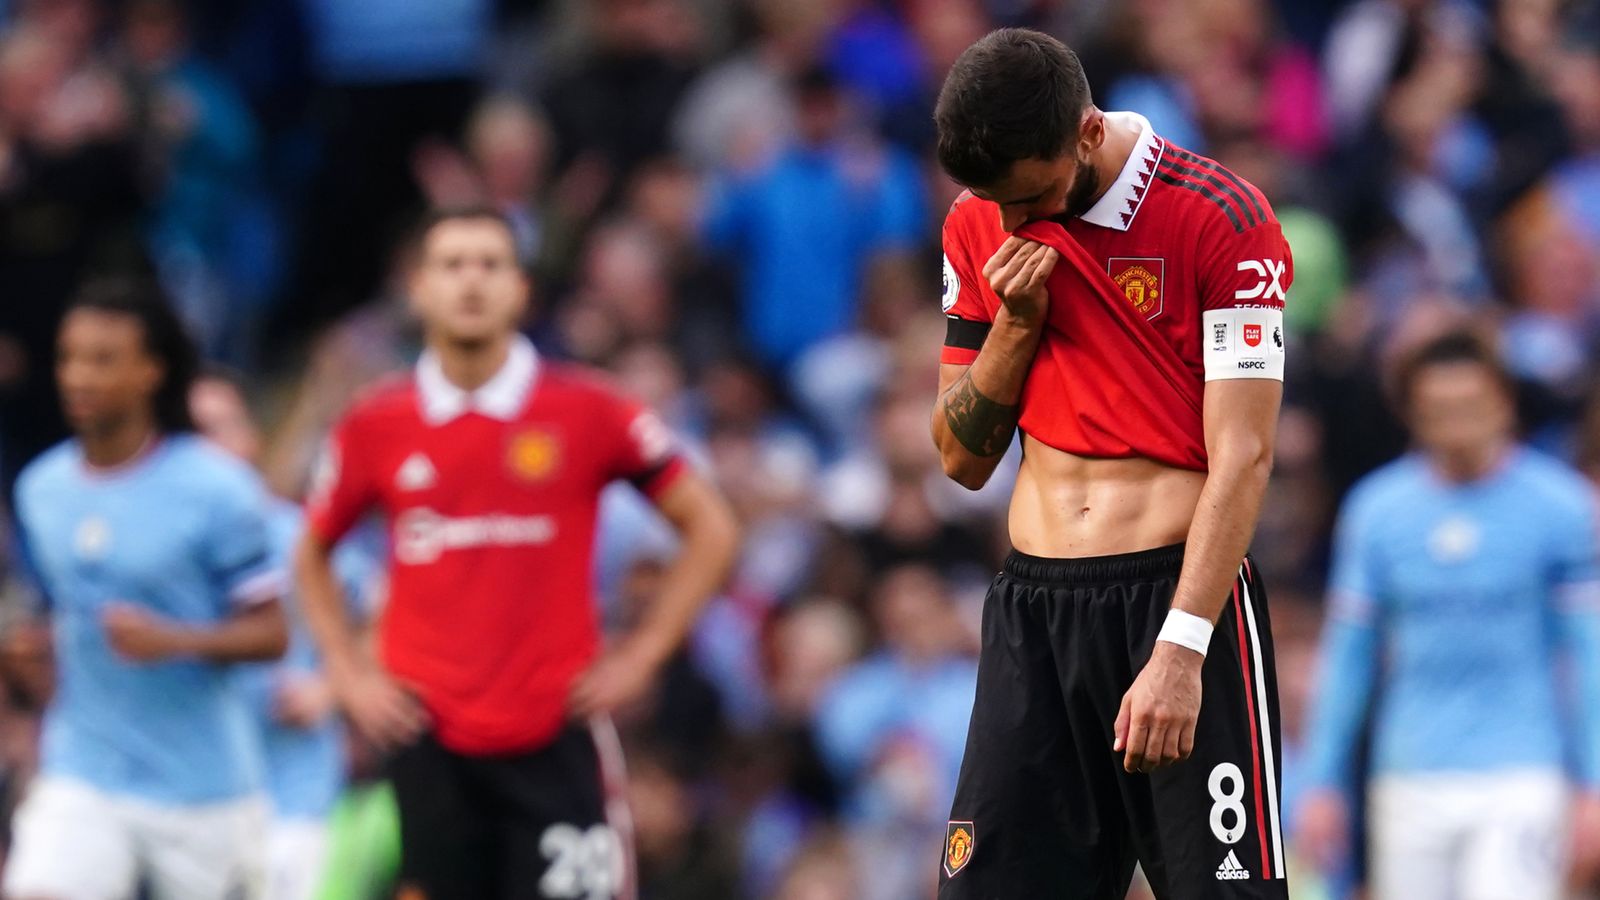 Man City 6-3 Man Utd: Gary Neville says Manchester United players ‘bottled’ the derby